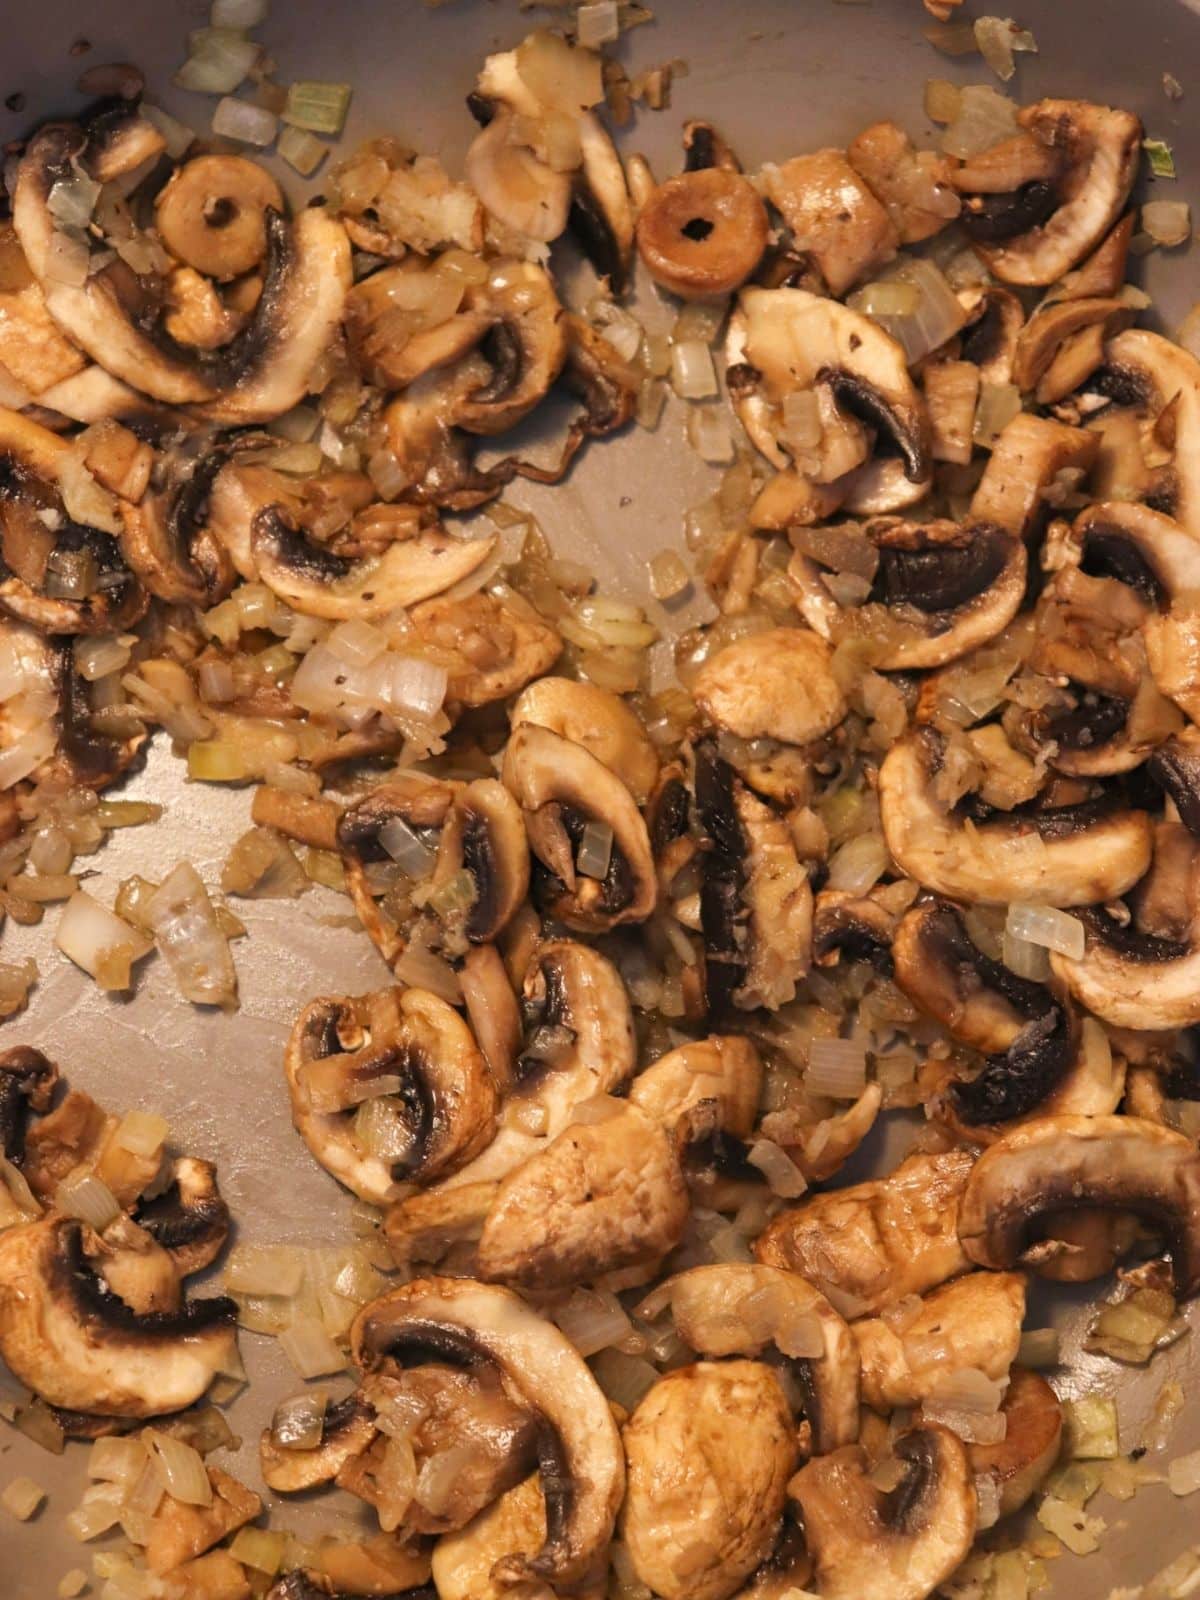 Mushrooms and onions sautéing in a frying pan.